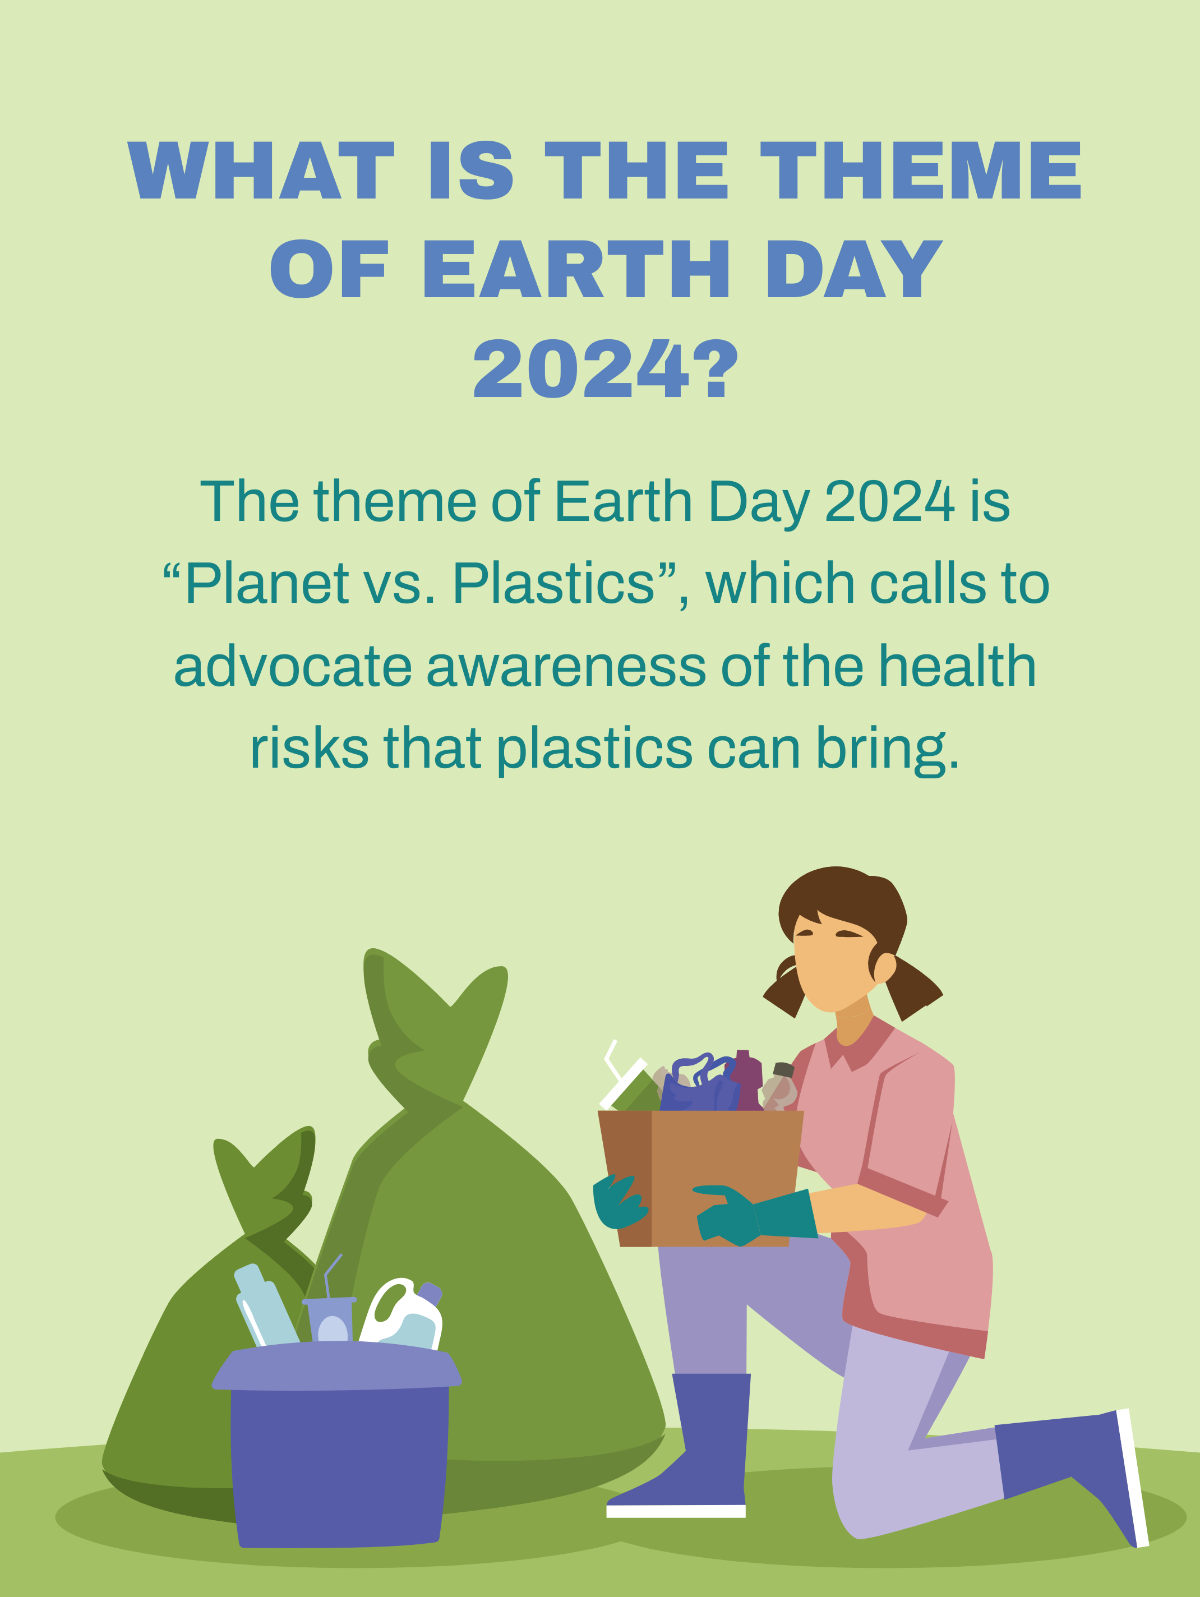 What is the theme of Earth Day 2024?